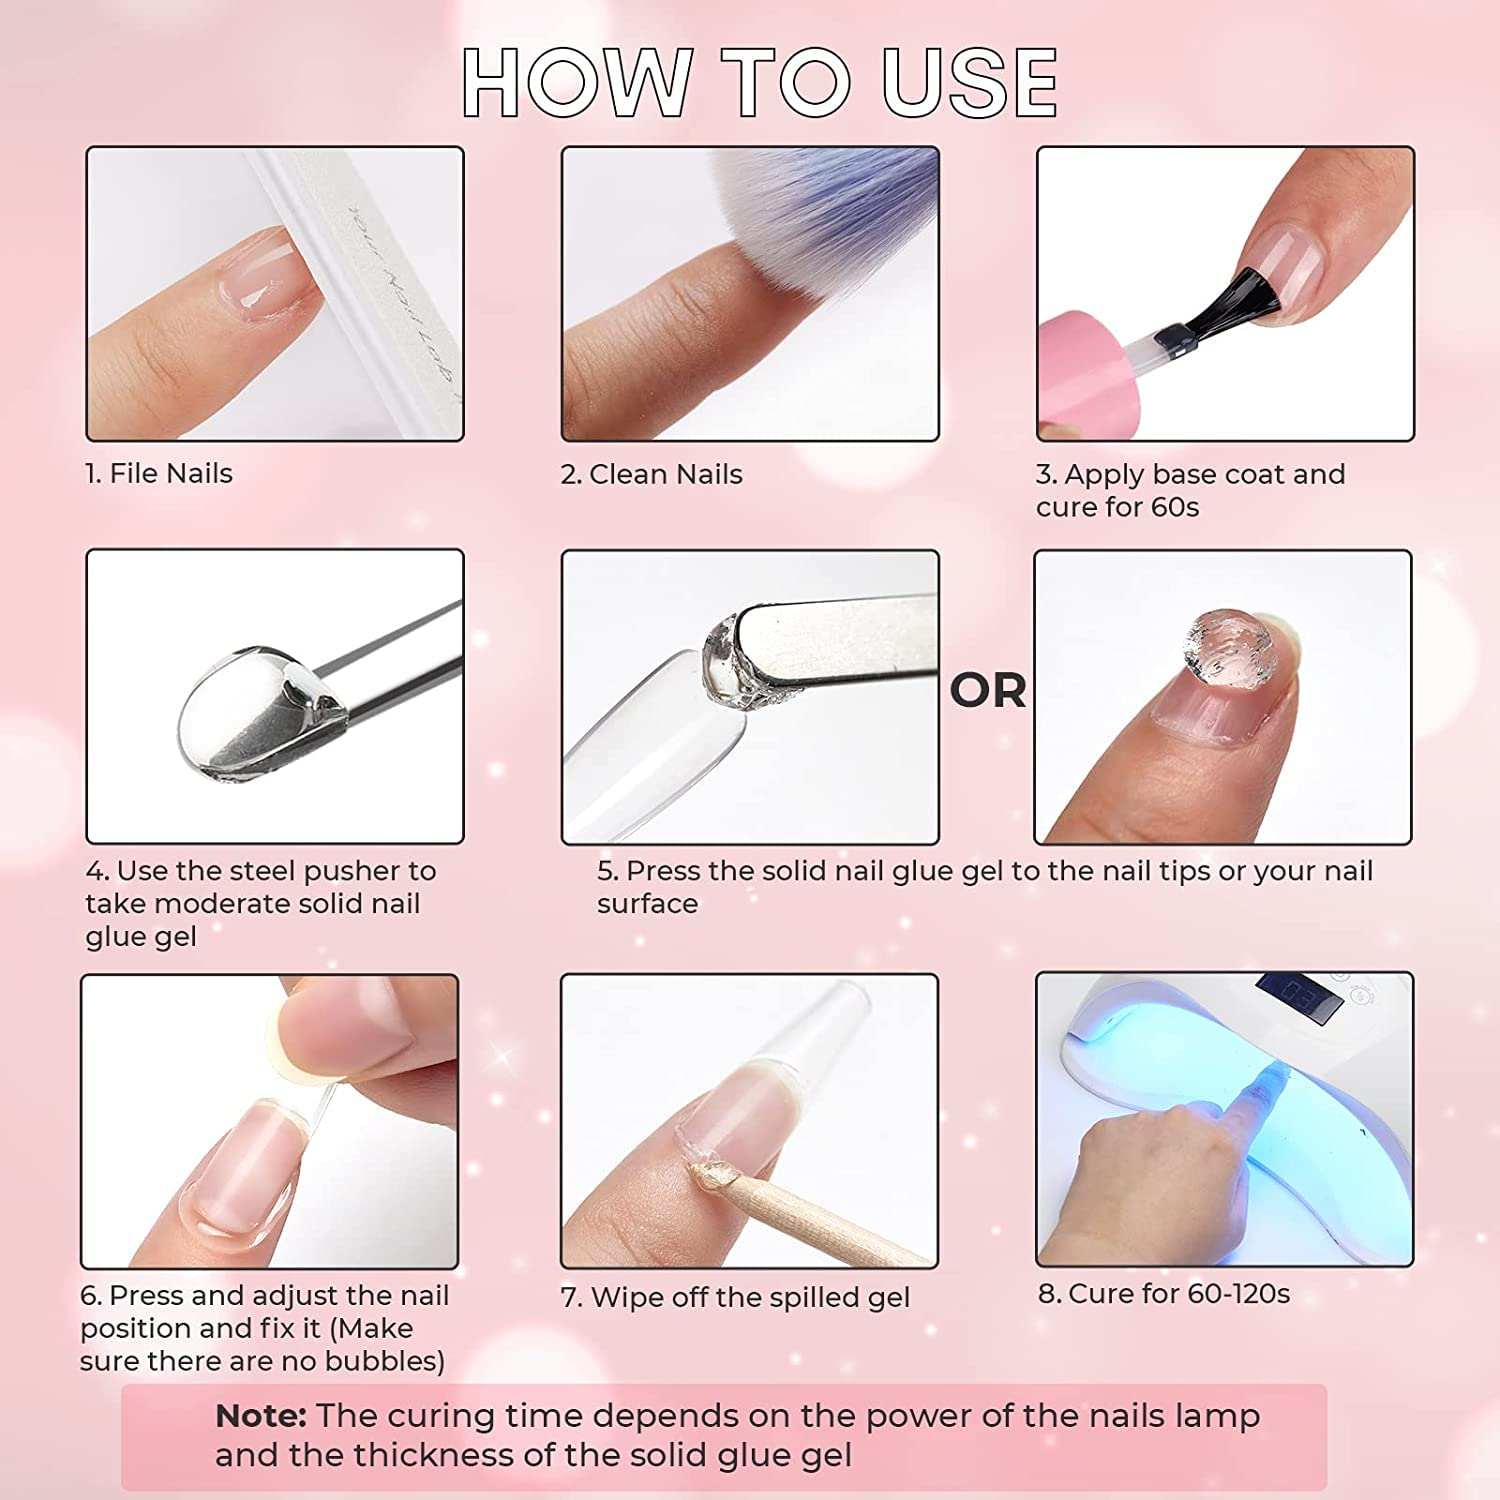 Nail Tips Gel x Nail Tips 504 Pcs Clear Full Cover Soft Gel Nail Tips  Acrylic Nail Tips False Nails with 15ml Gel Nail Glue - Long Coffin